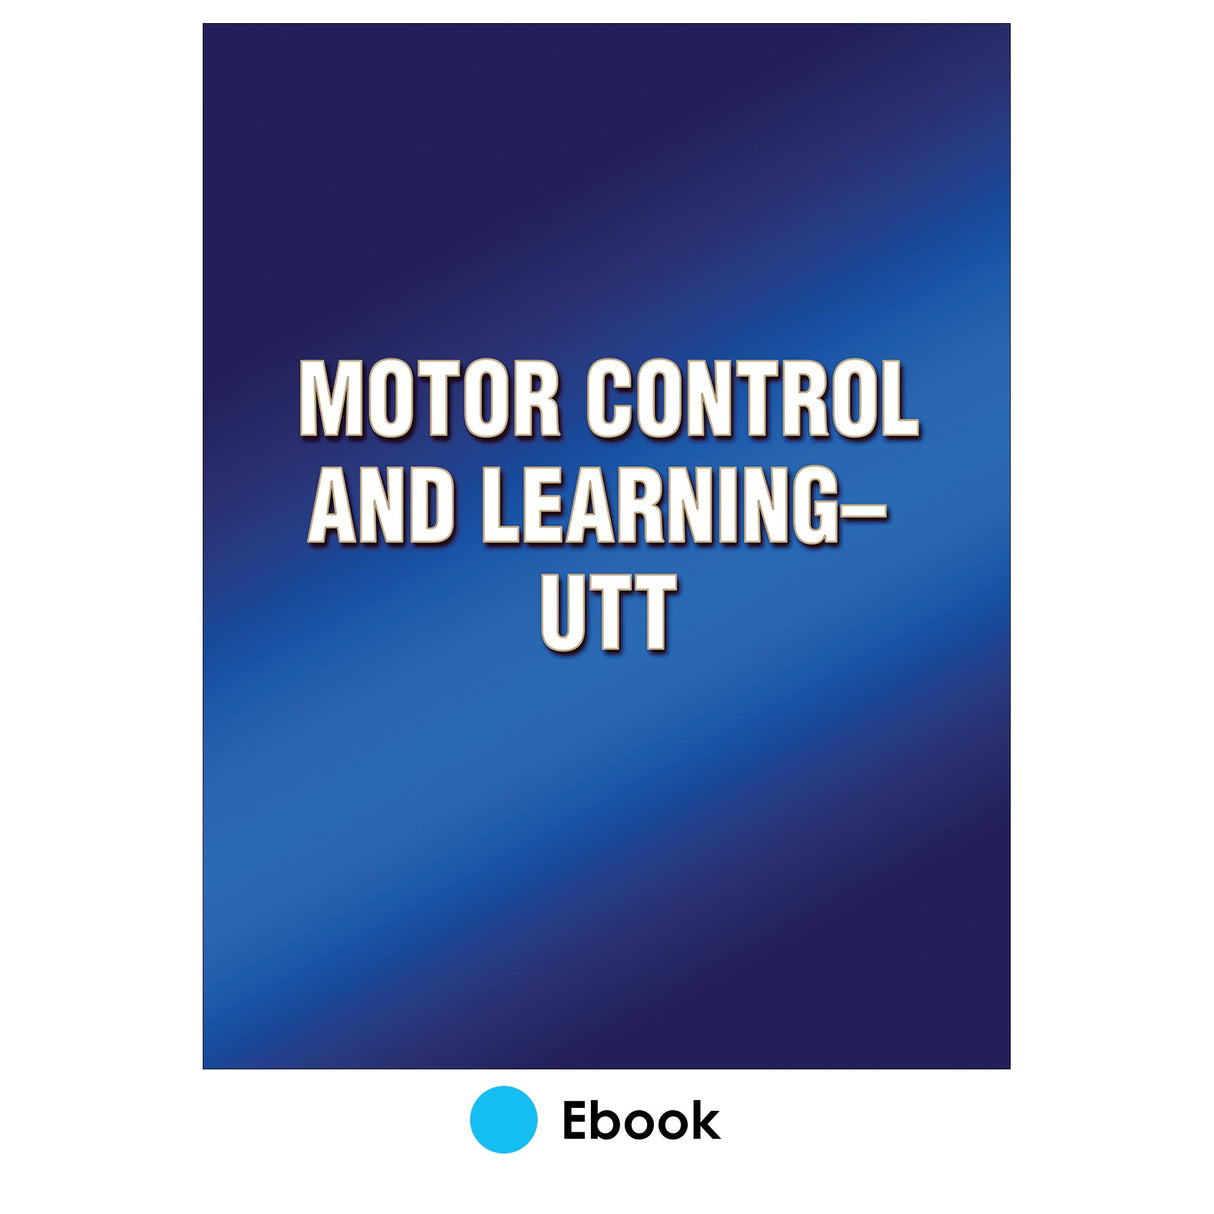 Motor Control and Learning-UTT